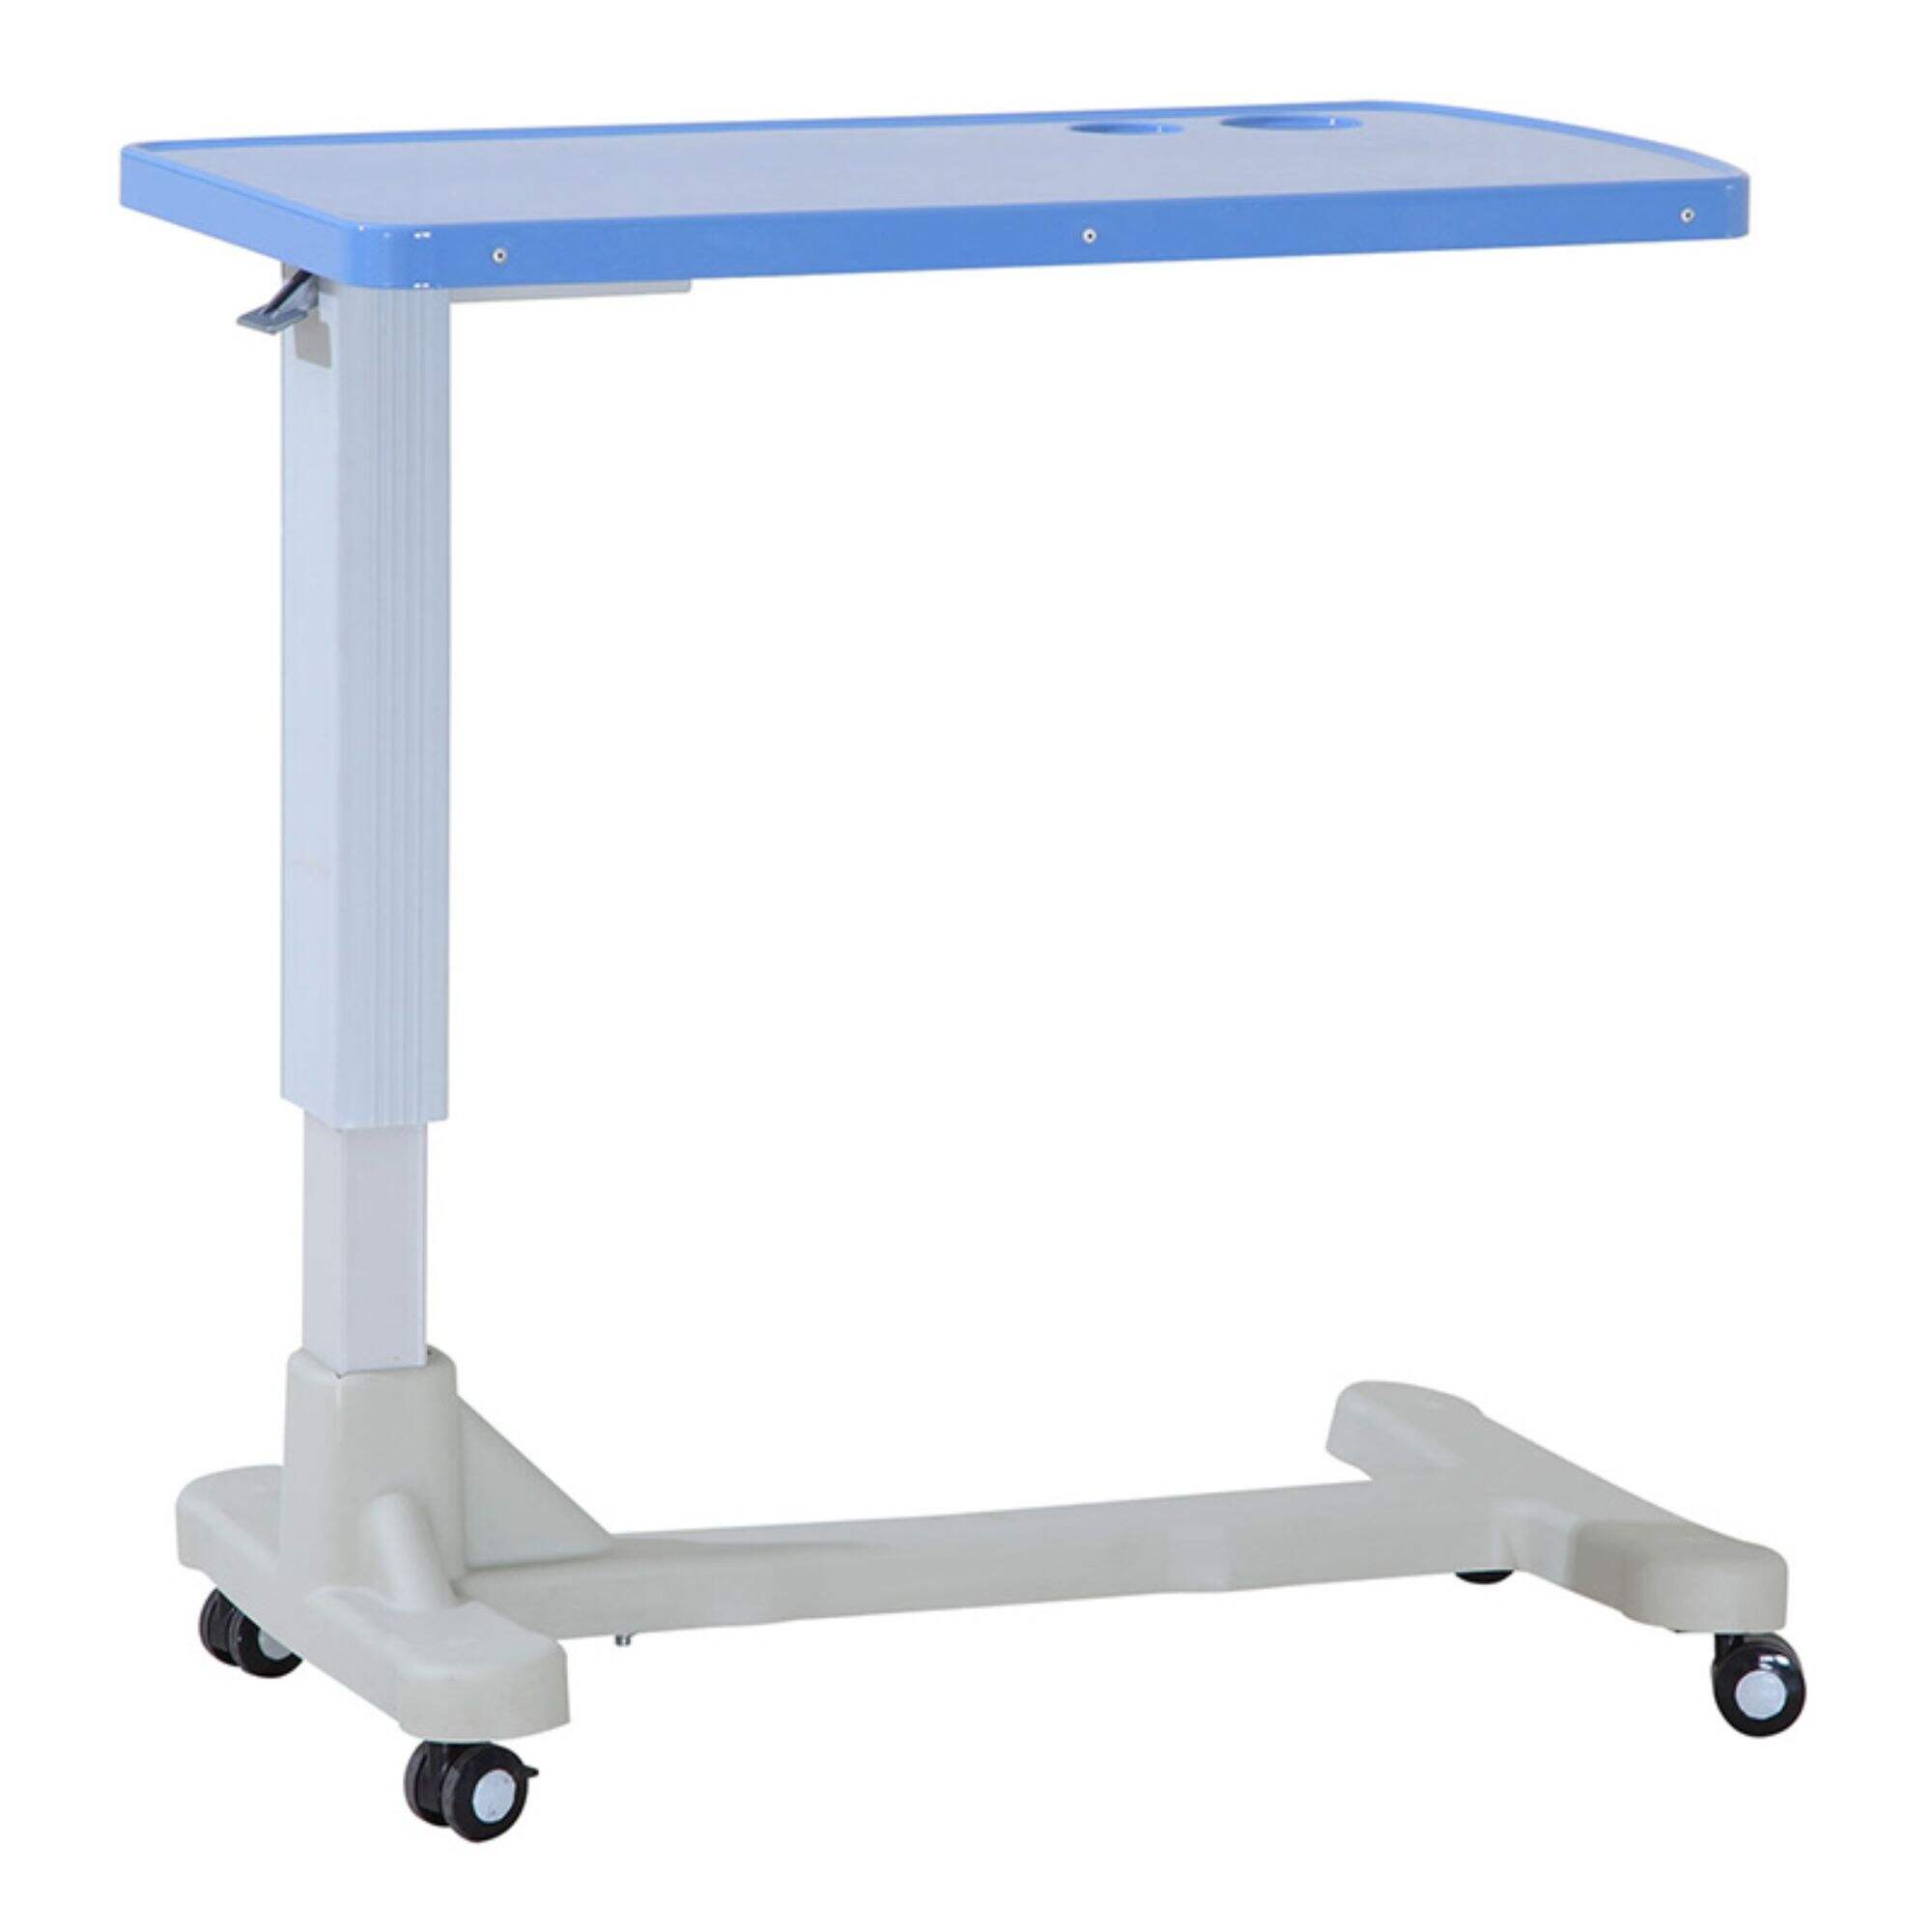 YFT001 Overbed Table